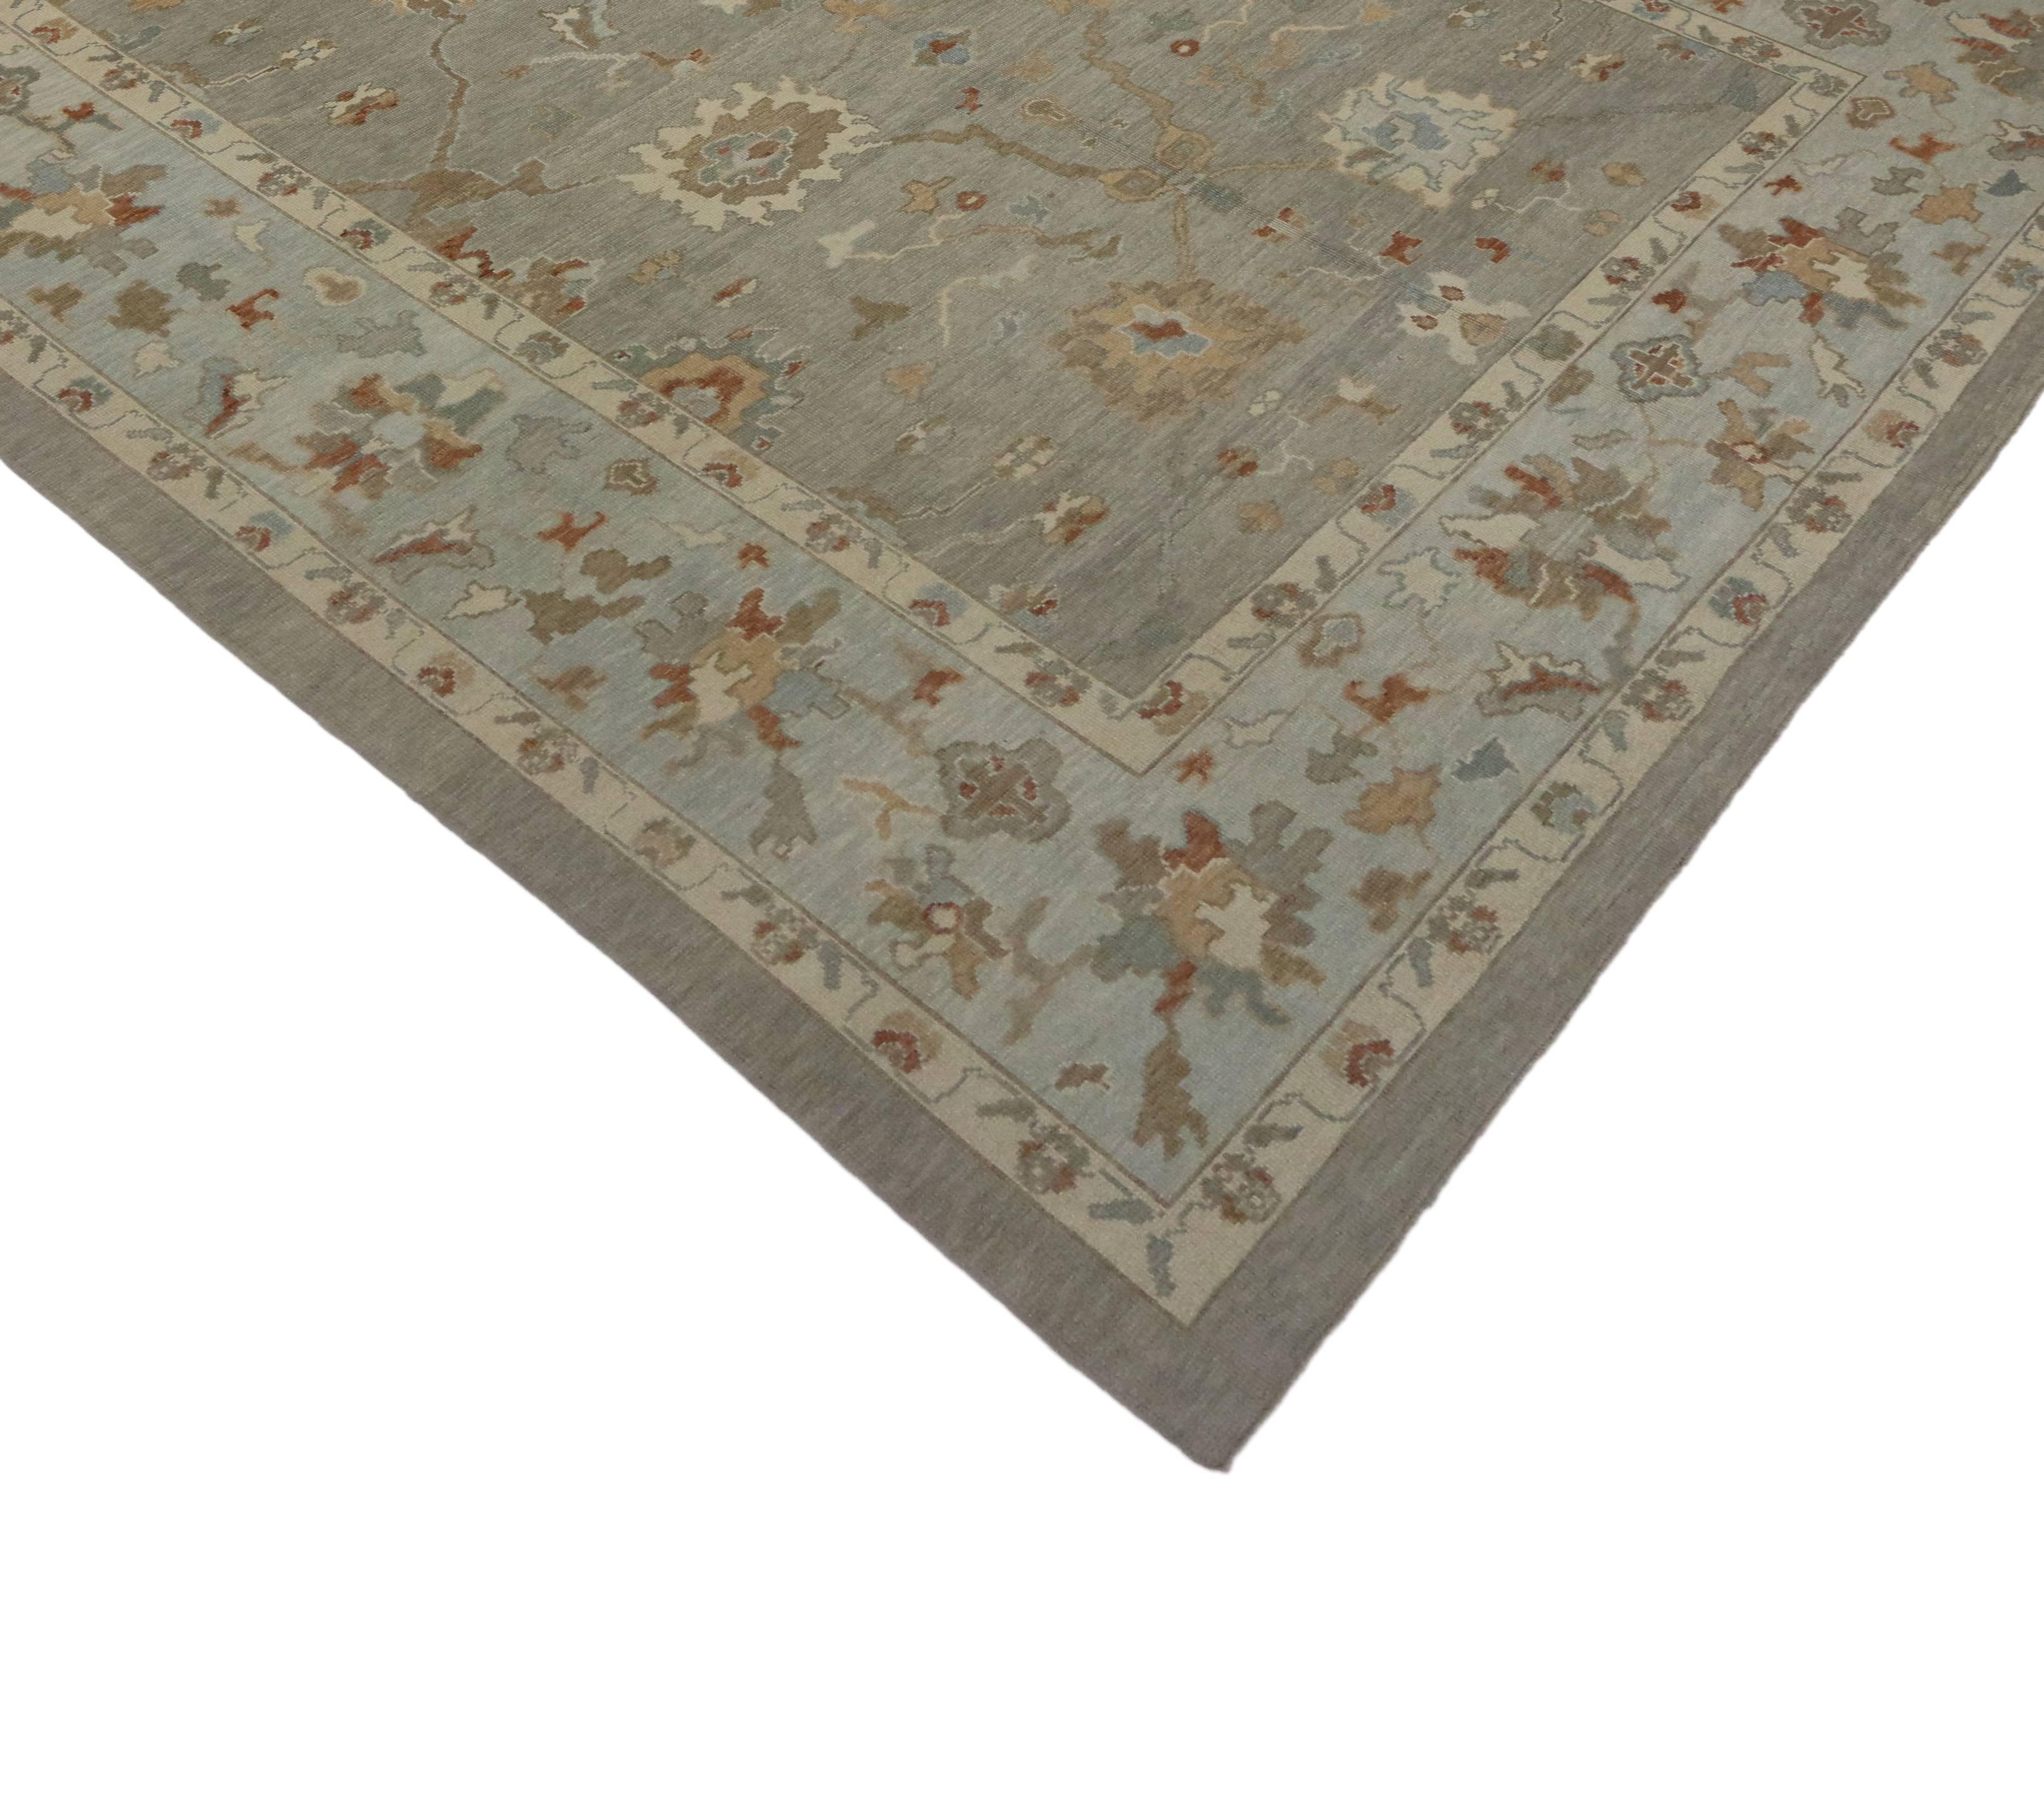 51517 Modern Turkish Oushak Rug with Transitional Style 11'03 x 15'00. With its transitional style and subtle, airy color palette, this modern Turkish Oushak rug keeps the eyes entertained, but it is still serene and relaxing. This transitional